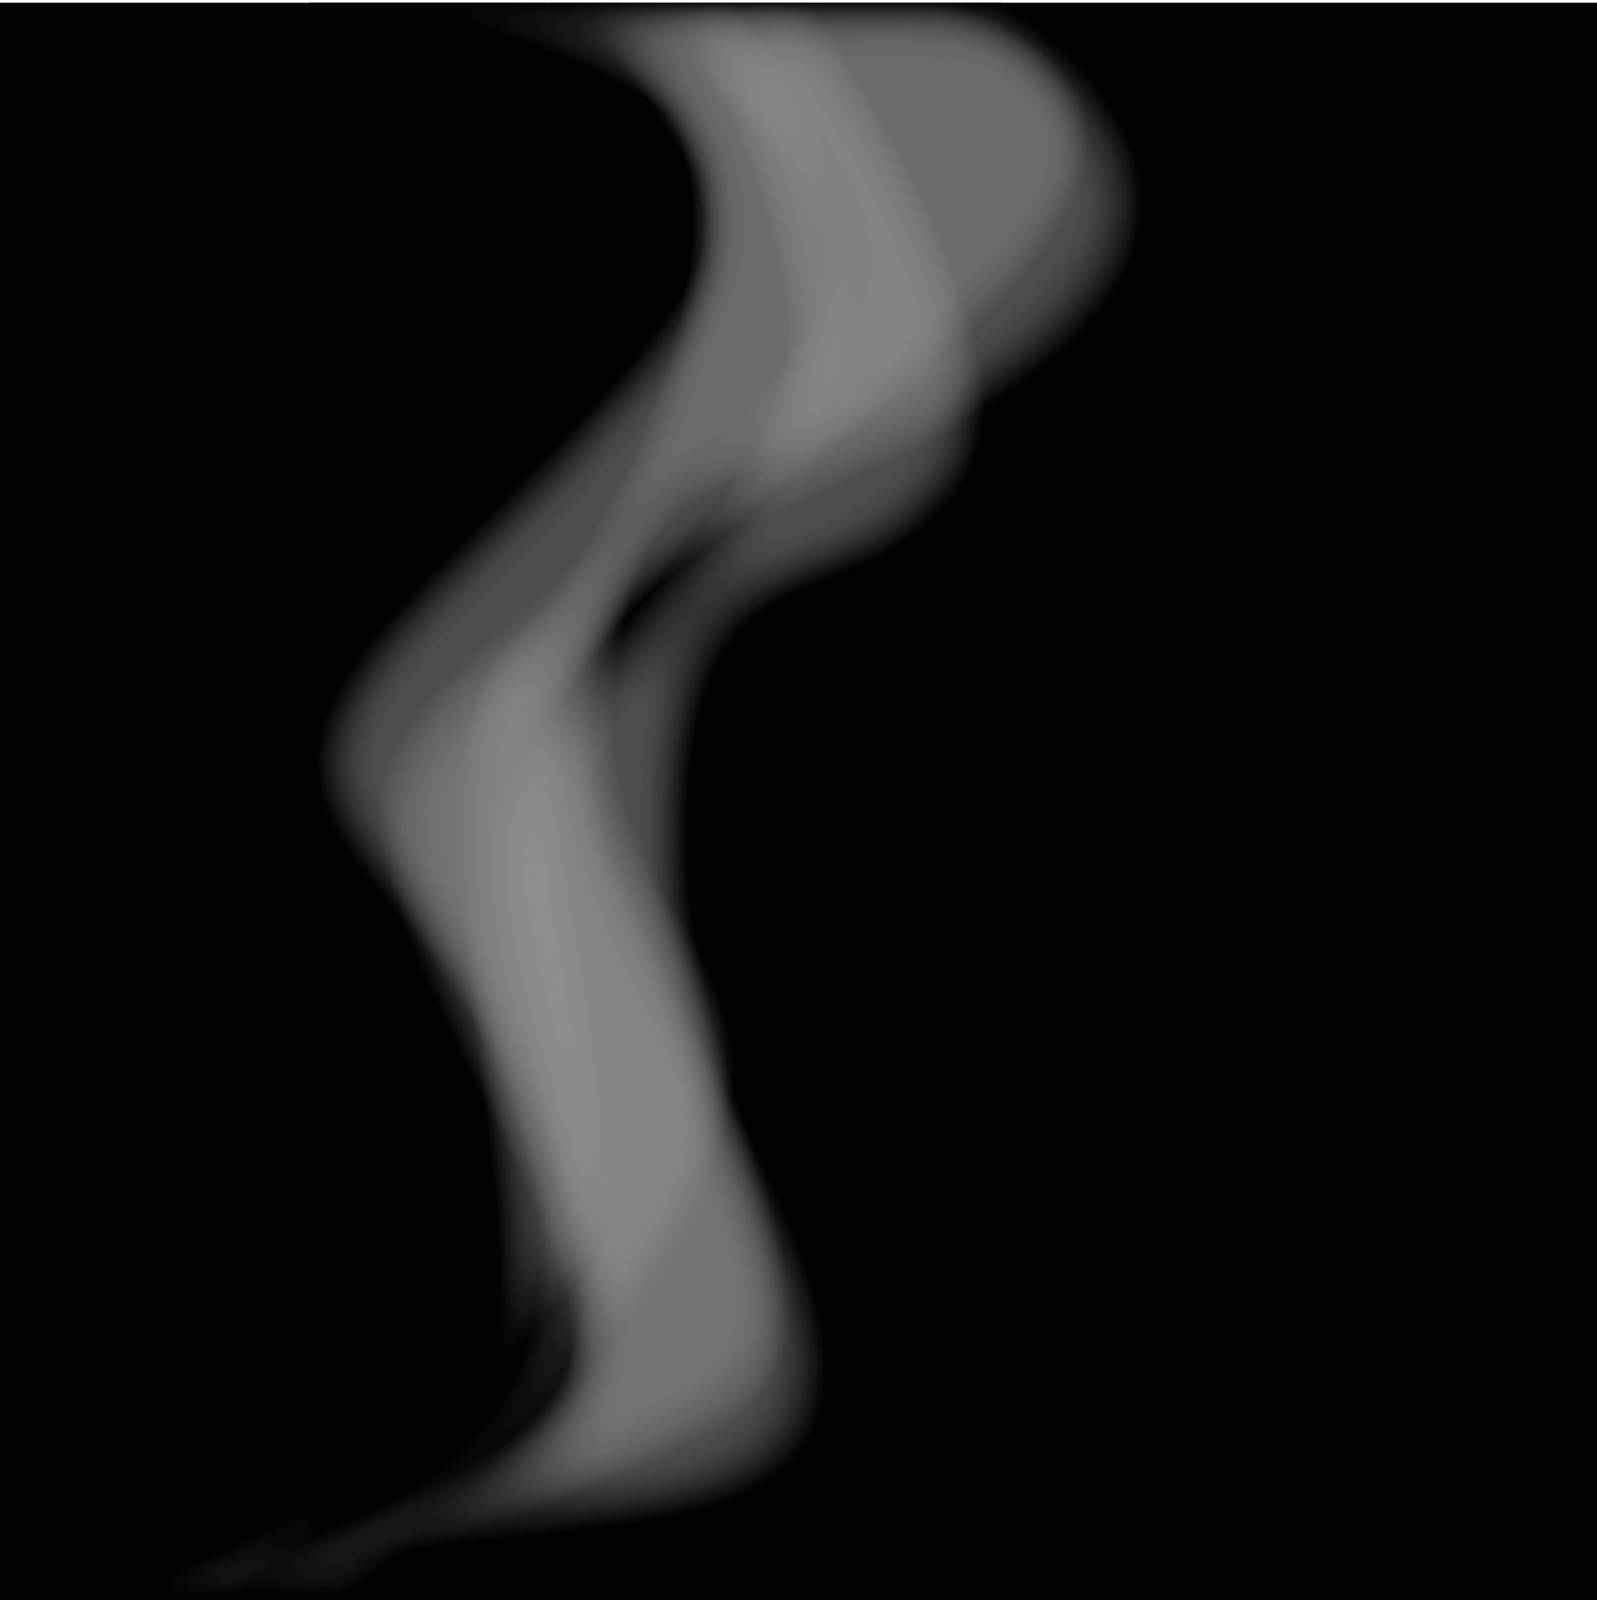 Whifs of rising smoke set against a dark background